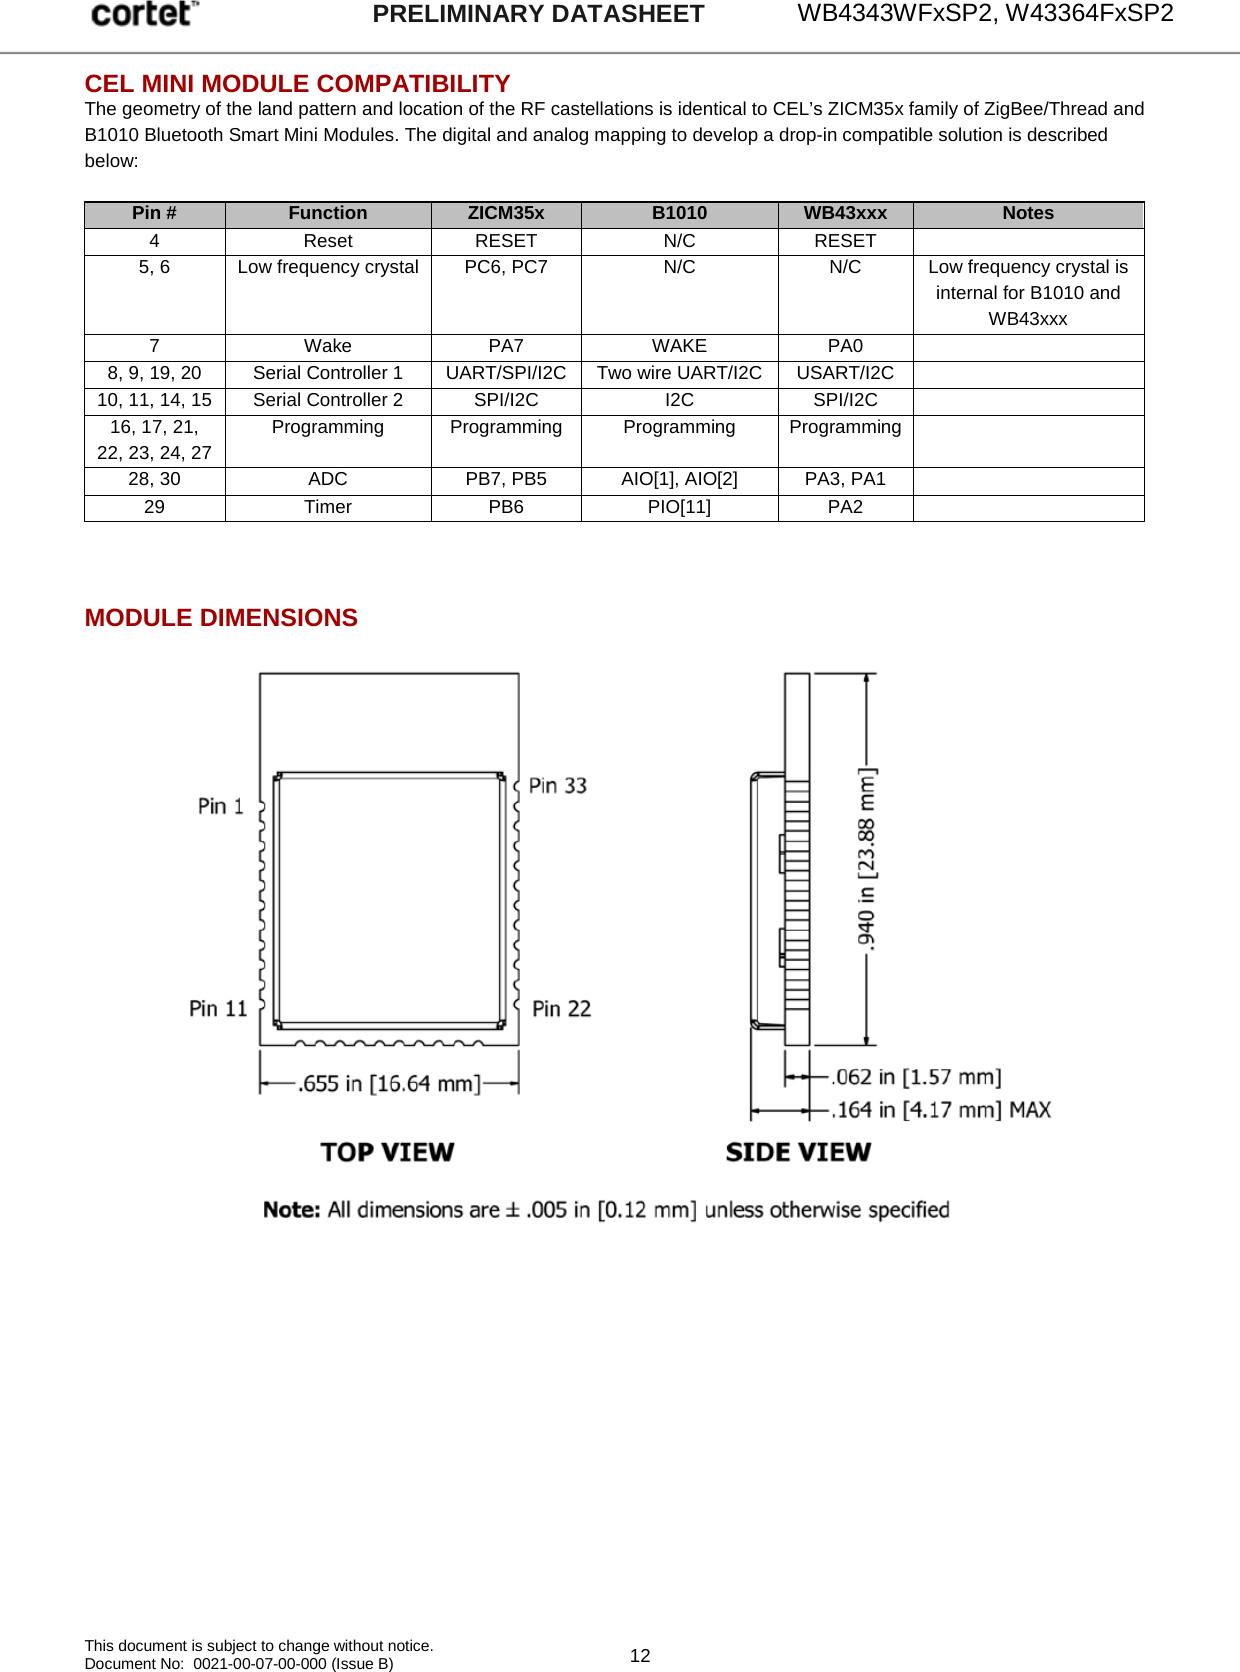     WB4343WFxSP2, W43364FxSP2   This document is subject to change without notice. Document No:  0021-00-07-00-000 (Issue B)  12 PRELIMINARY DATASHEET CEL MINI MODULE COMPATIBILITY The geometry of the land pattern and location of the RF castellations is identical to CEL’s ZICM35x family of ZigBee/Thread and B1010 Bluetooth Smart Mini Modules. The digital and analog mapping to develop a drop-in compatible solution is described below:   Pin # Function ZICM35x B1010 WB43xxx Notes 4 Reset RESET N/C RESET  5, 6 Low frequency crystal PC6, PC7 N/C N/C Low frequency crystal is internal for B1010 and WB43xxx 7 Wake PA7 WAKE PA0  8, 9, 19, 20 Serial Controller 1 UART/SPI/I2C Two wire UART/I2C USART/I2C  10, 11, 14, 15 Serial Controller 2 SPI/I2C I2C SPI/I2C  16, 17, 21, 22, 23, 24, 27 Programming Programming Programming Programming  28, 30 ADC PB7, PB5 AIO[1], AIO[2] PA3, PA1  29 Timer PB6 PIO[11] PA2    MODULE DIMENSIONS         